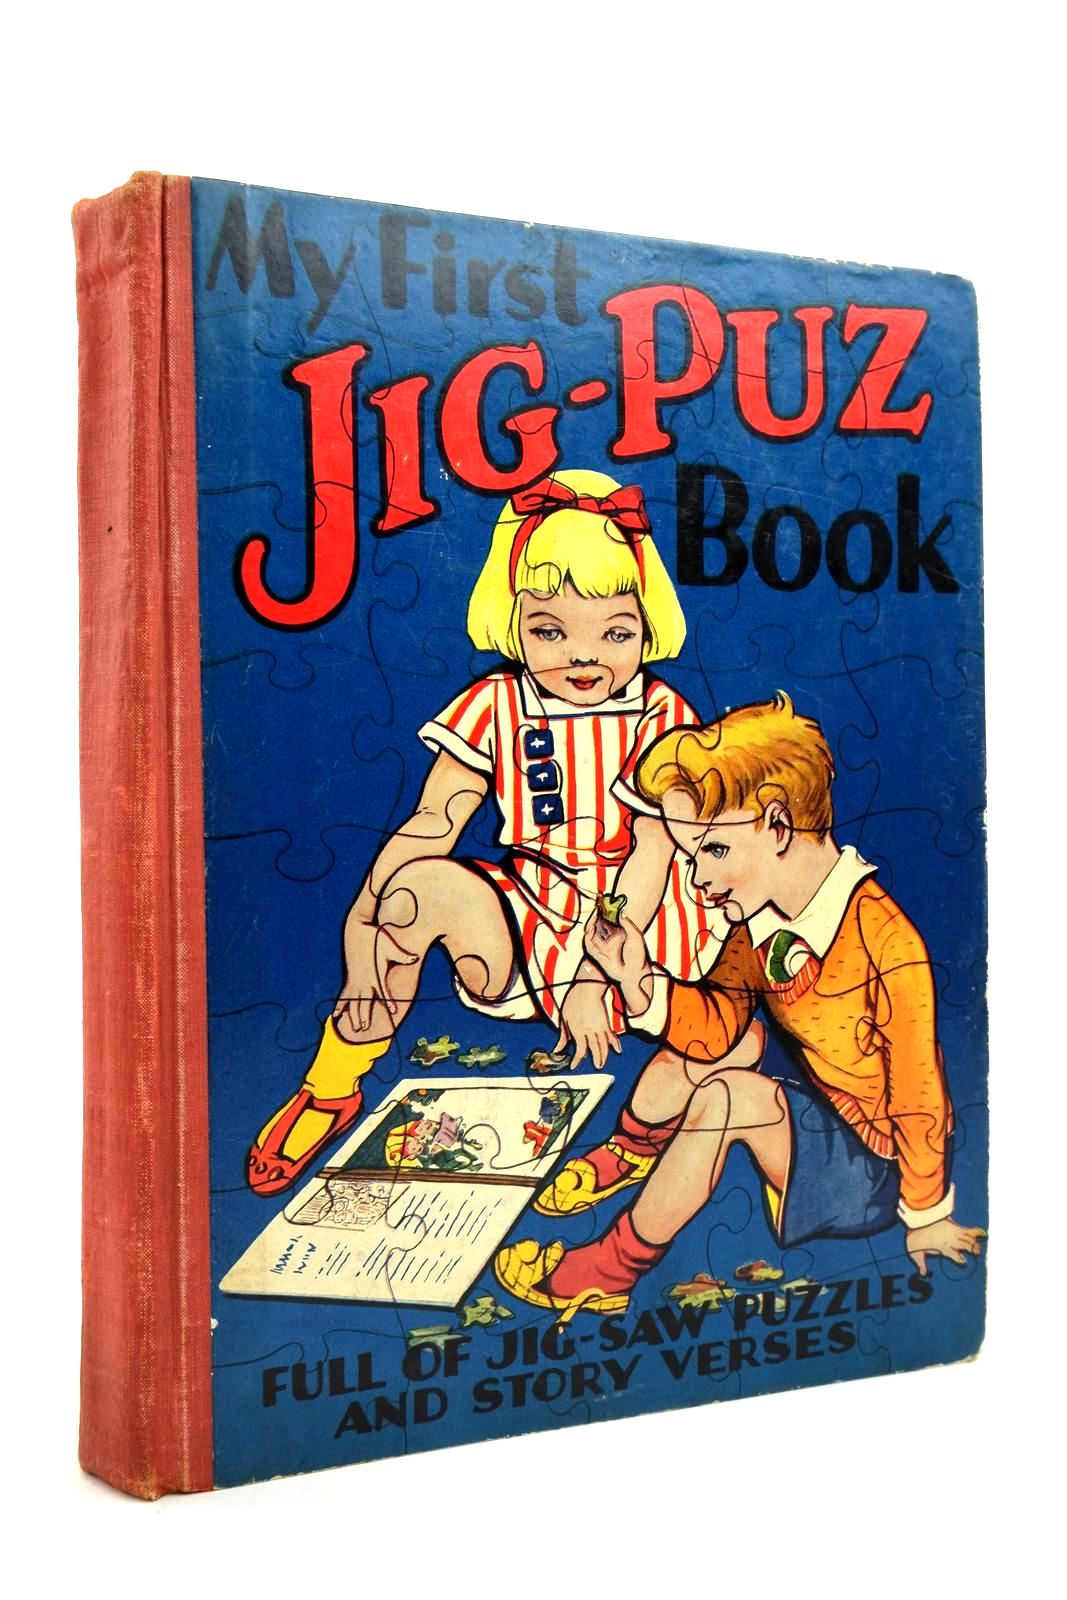 Photo of MY FIRST JIG-PUZ BOOK published by John Leng &amp; Co. Ltd. (STOCK CODE: 2140072)  for sale by Stella & Rose's Books